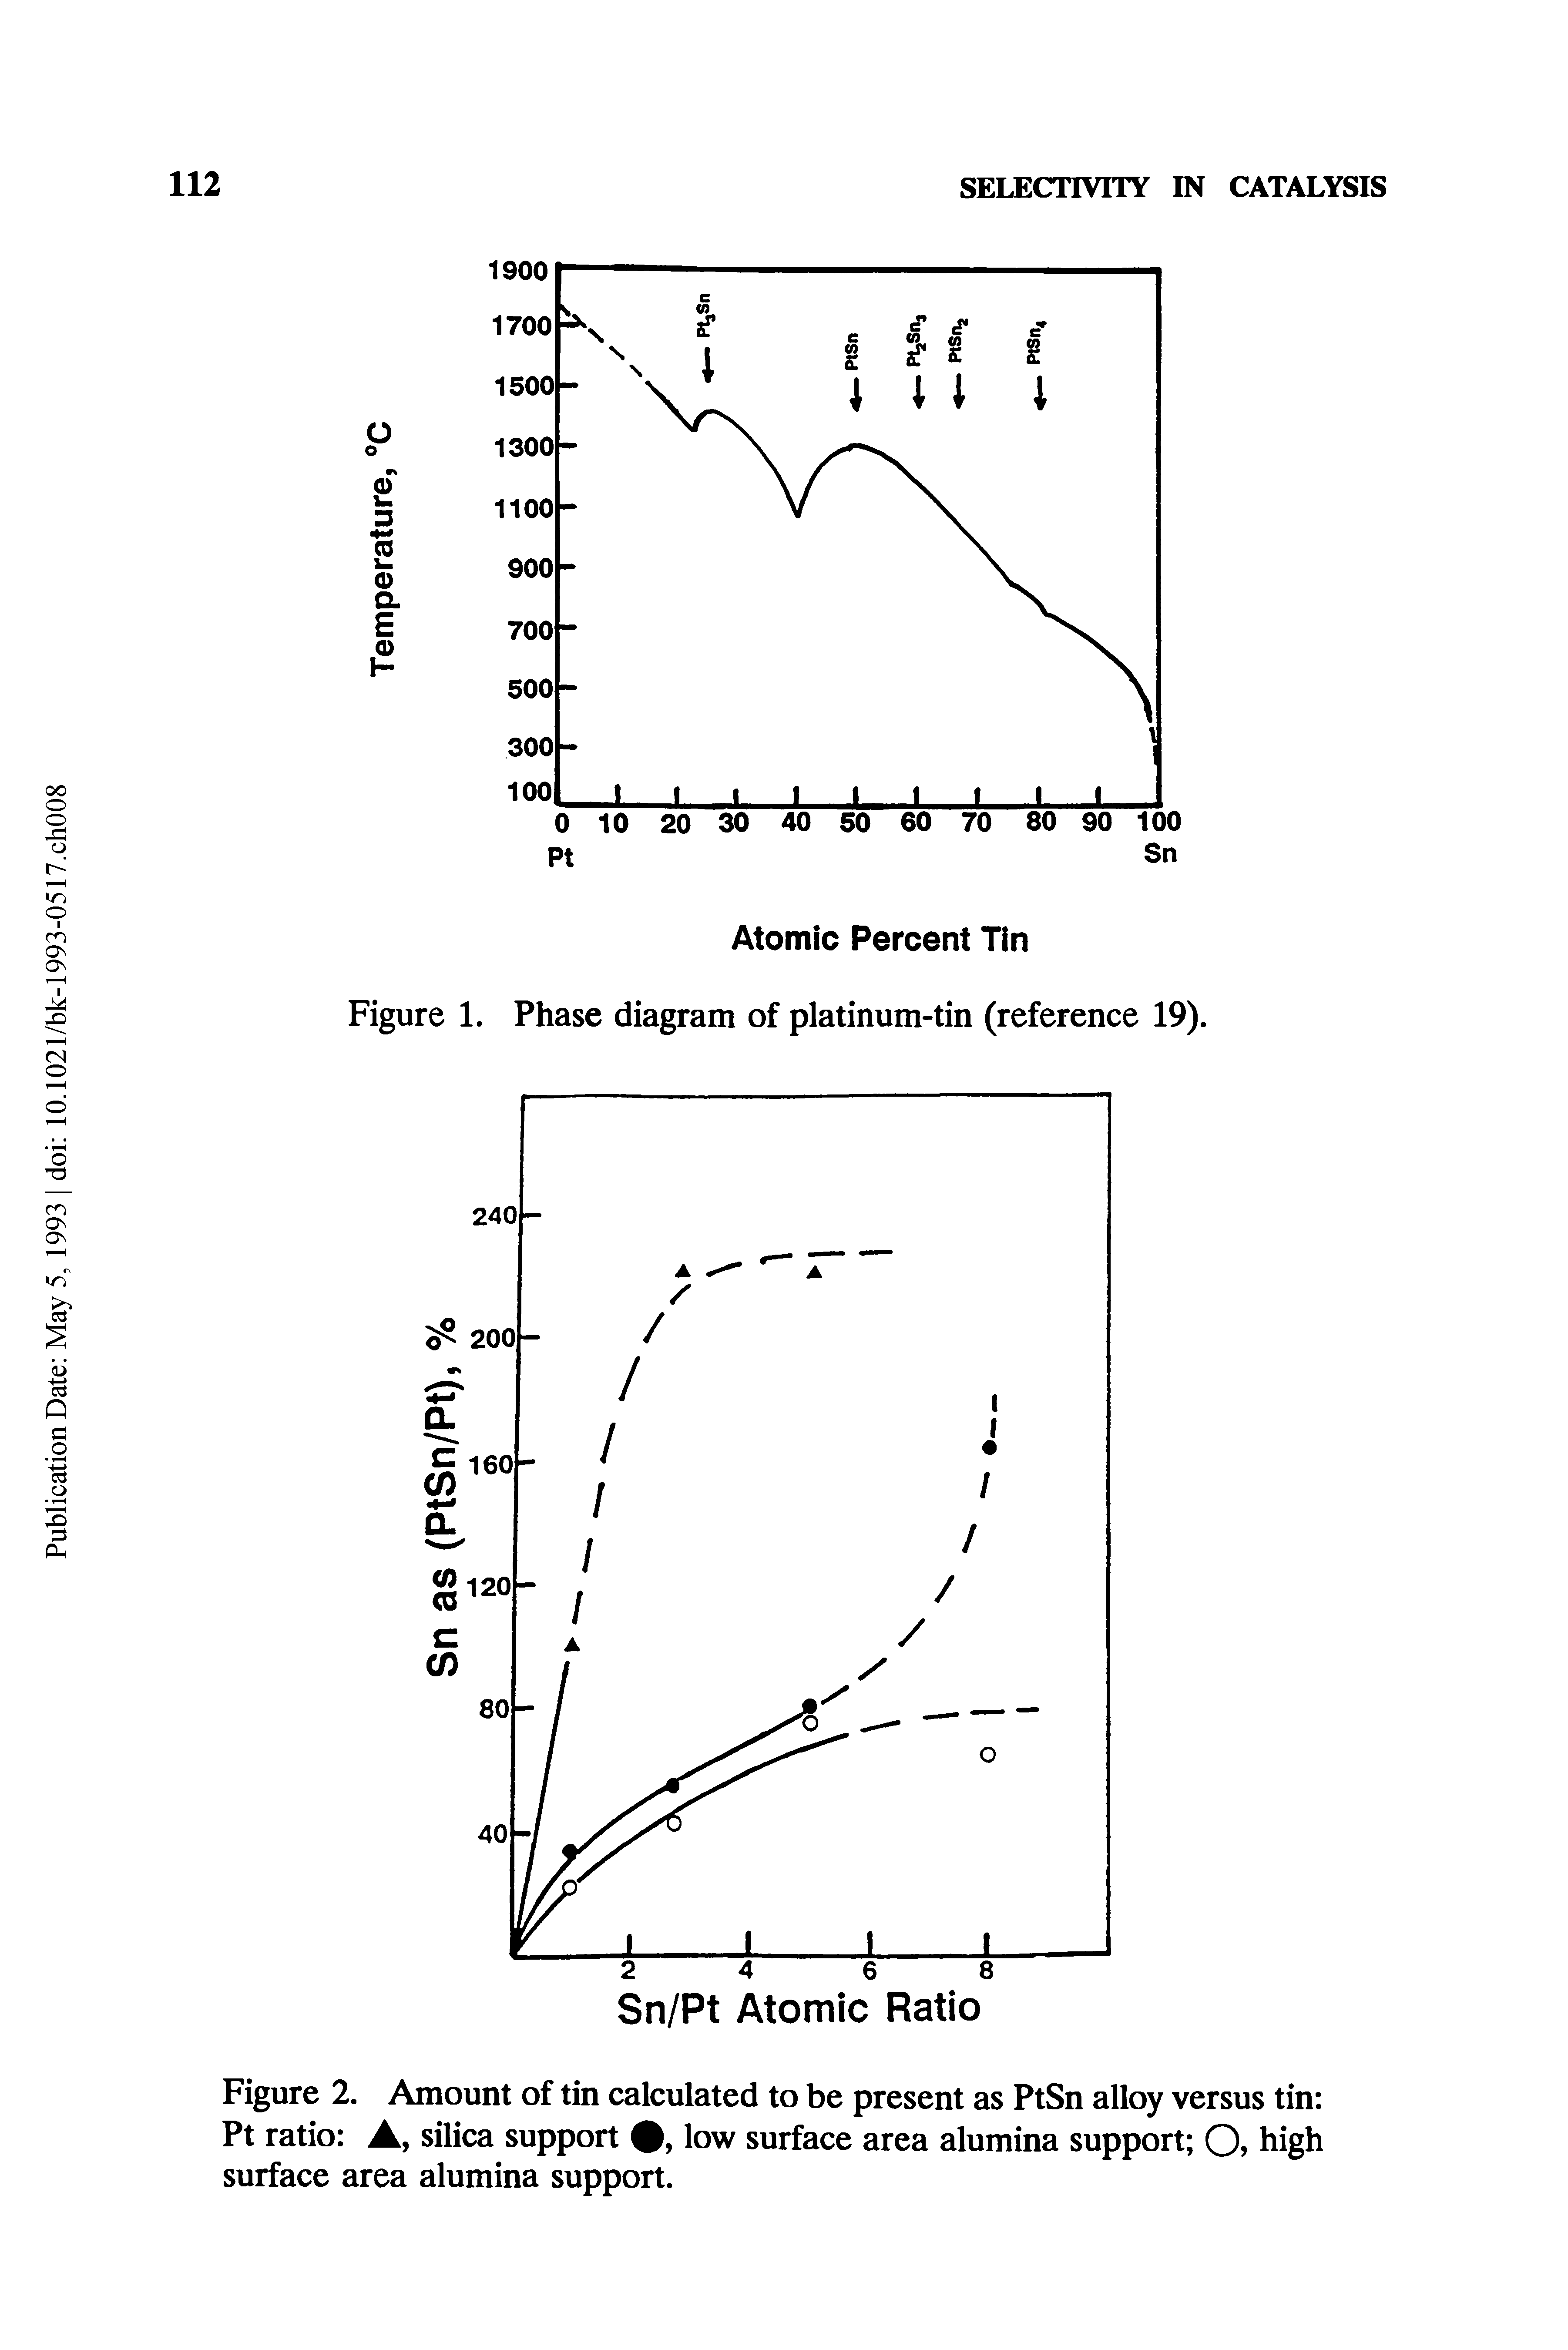 Figure 2. Amount of tin calculated to be present as PtSn alloy versus tin Pt ratio , silica support, low surface area alumina support O, high surface area alumina support.